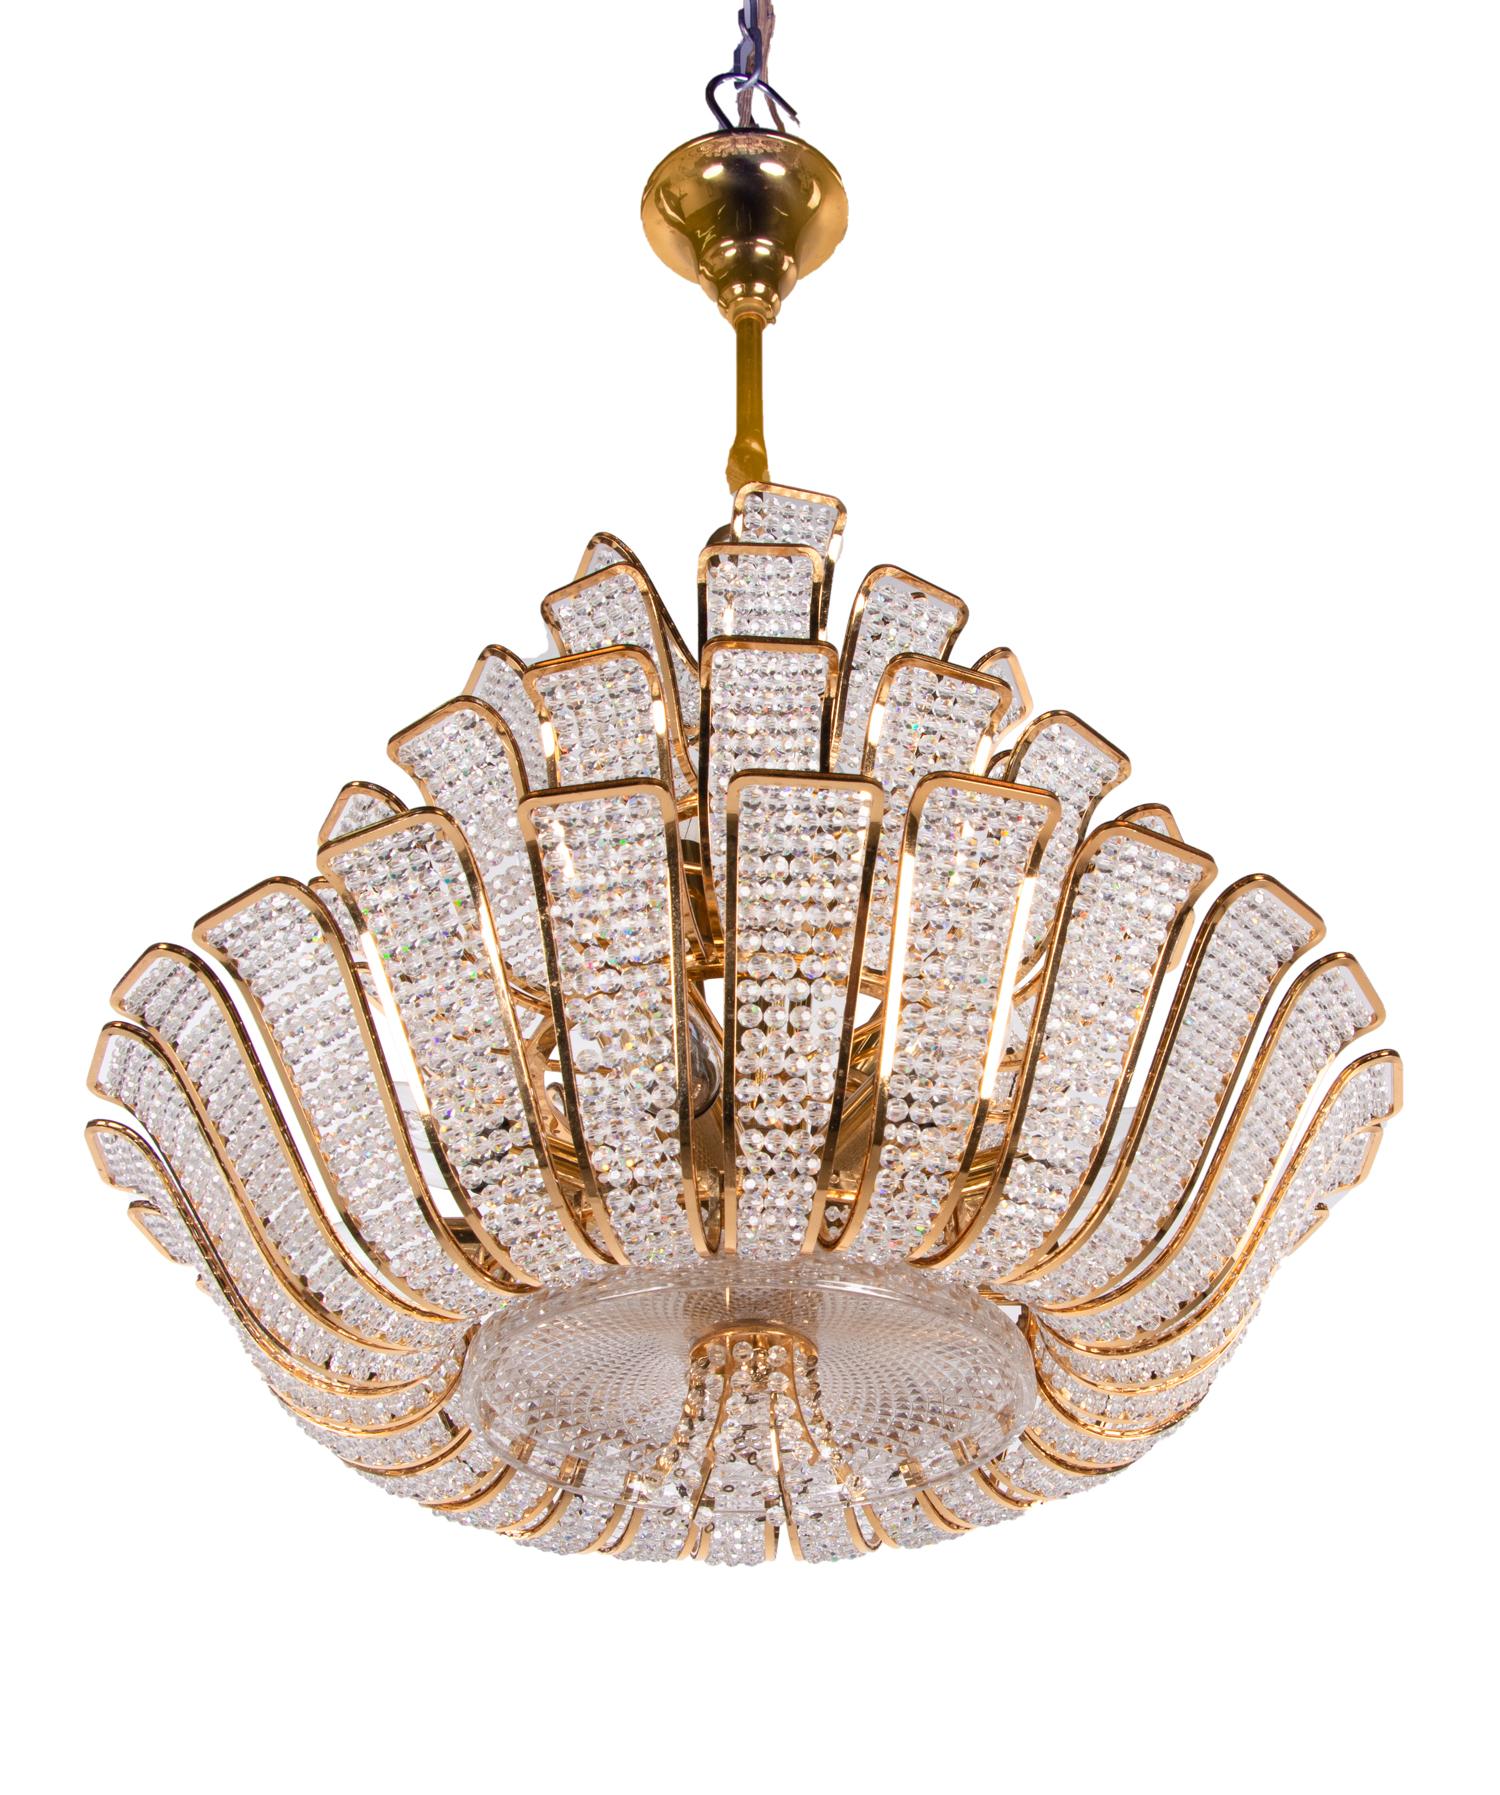 Glamorous chandelier made of a 24-carat gold-plated brass frame with crystal pearlss. 
Manufactured by Palwa (Palme & Walter), Germany in the 1960s. 

Style: Hollywood Regency. 
Colors: clear and golden. 
Materials: crystal glass and gilt